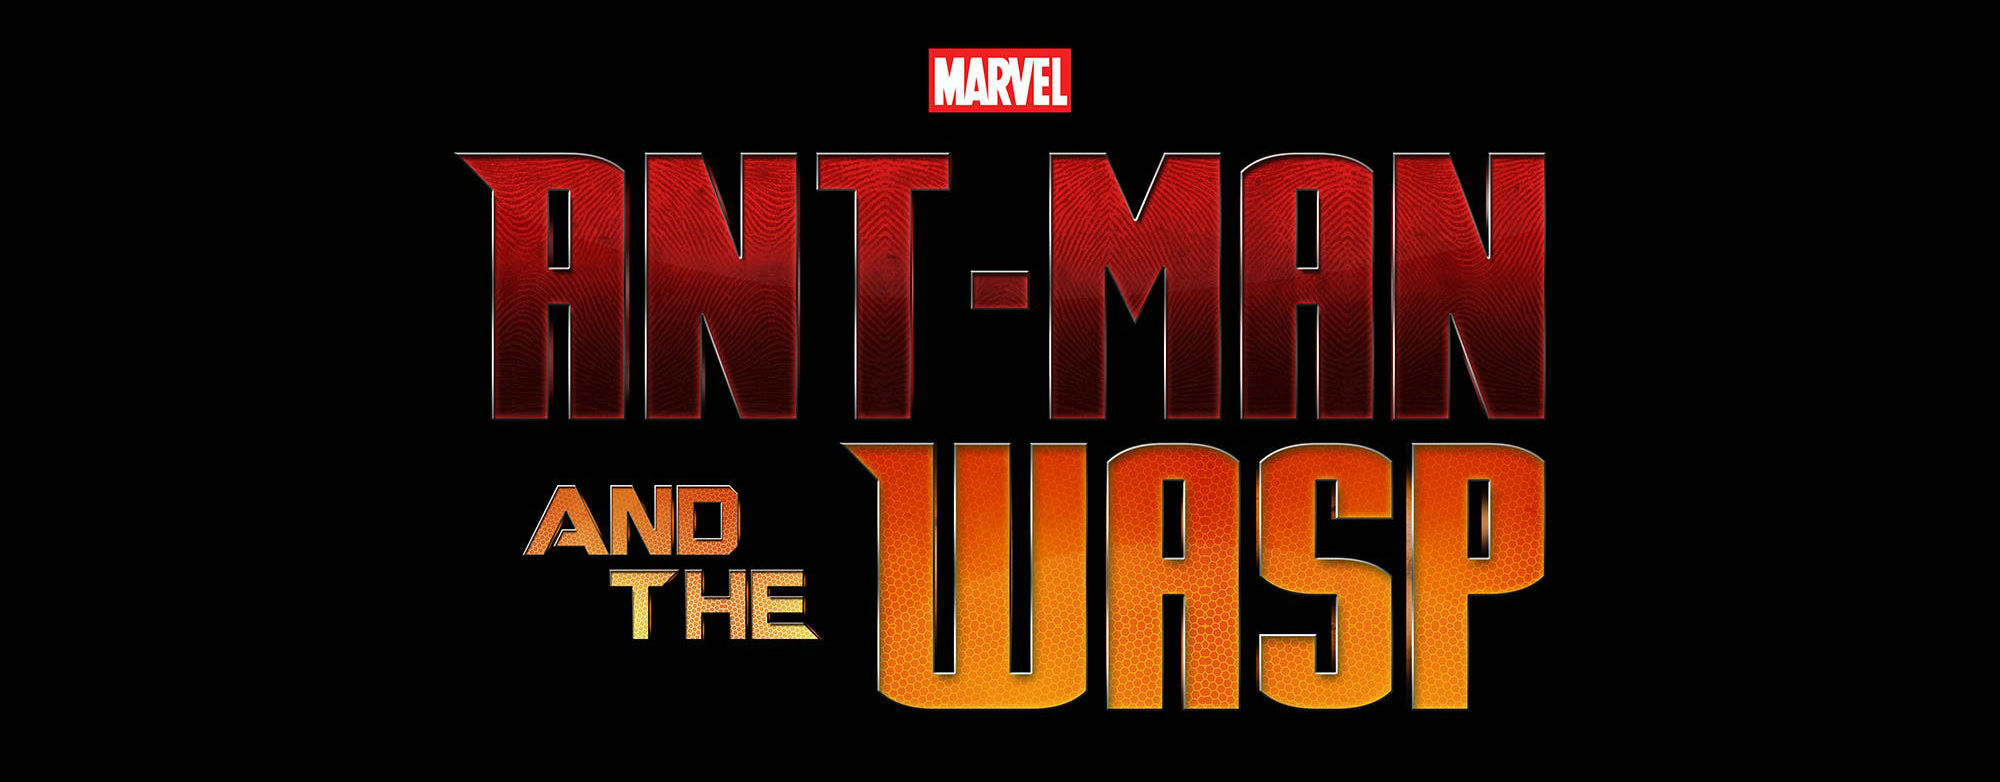 Ant-Man-and-the-Wasp-Logo-by-Joe-Steiner